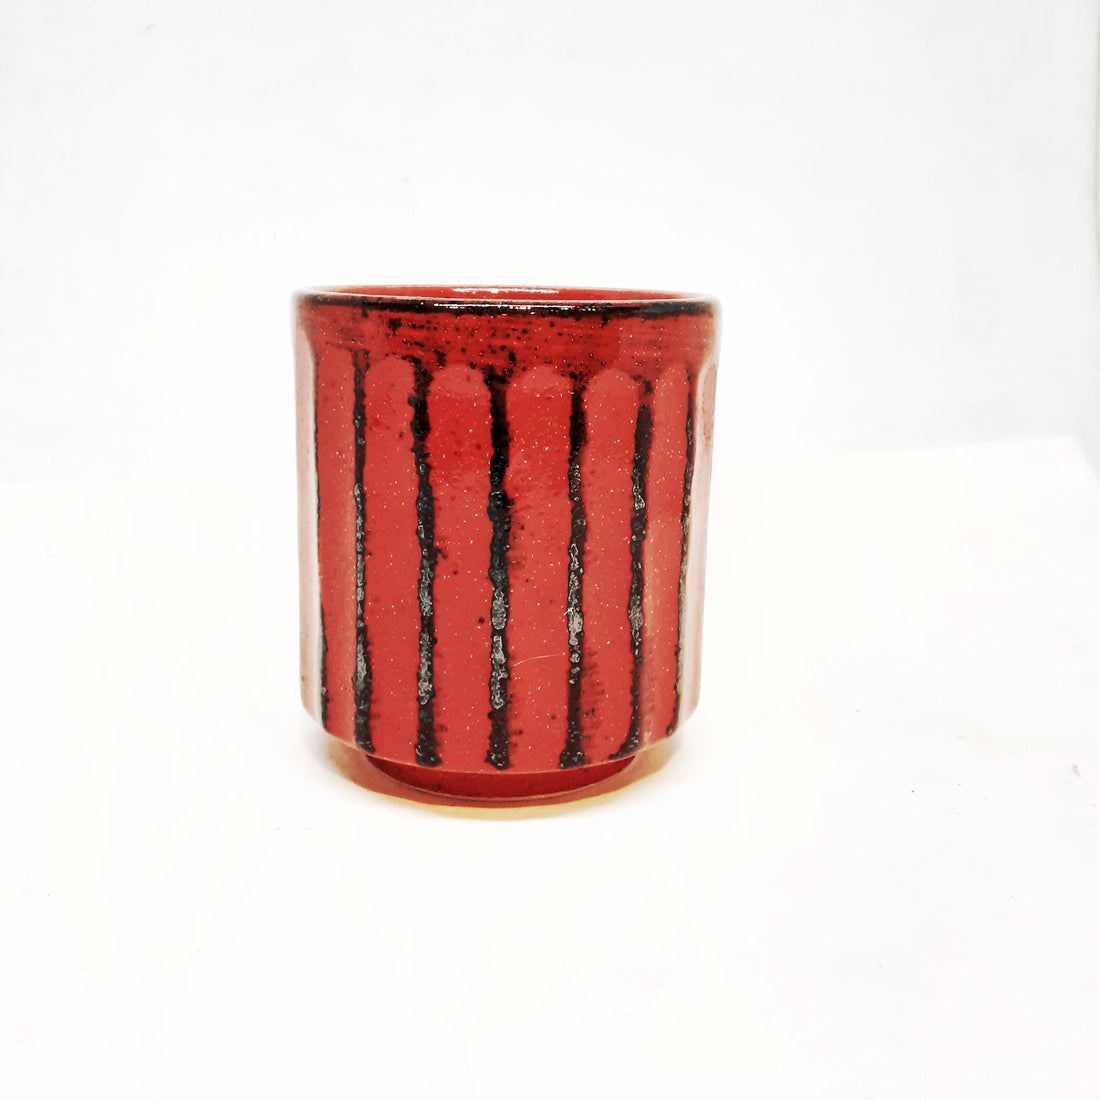 Japanese Tea Cup - Speckle Red